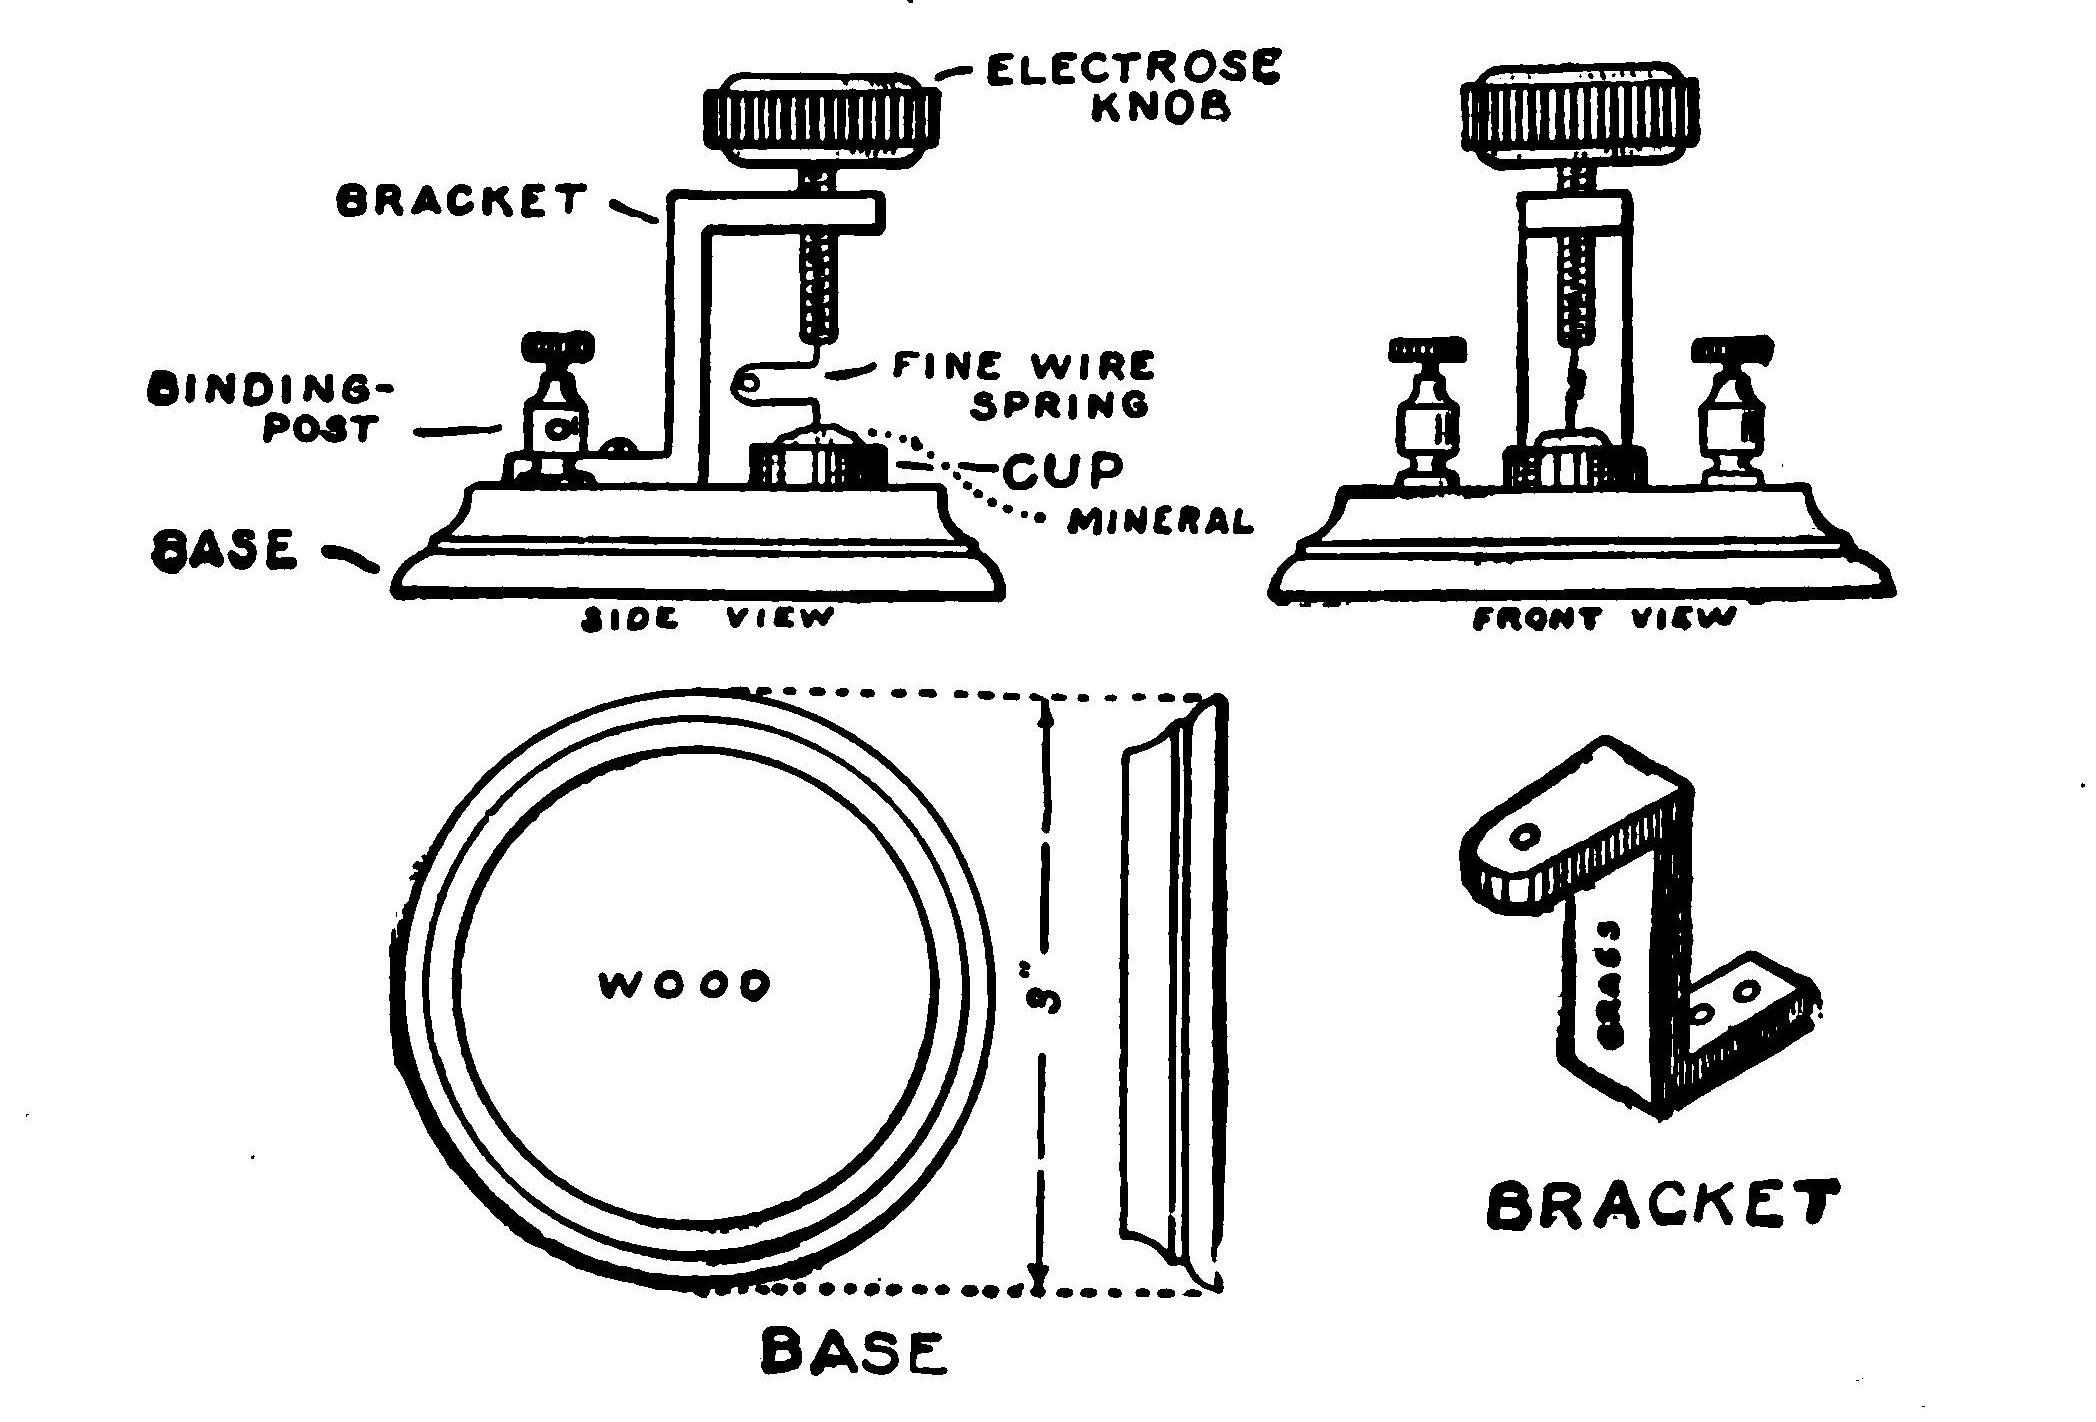 Fig. 211.—Details of the Crystal Detector.